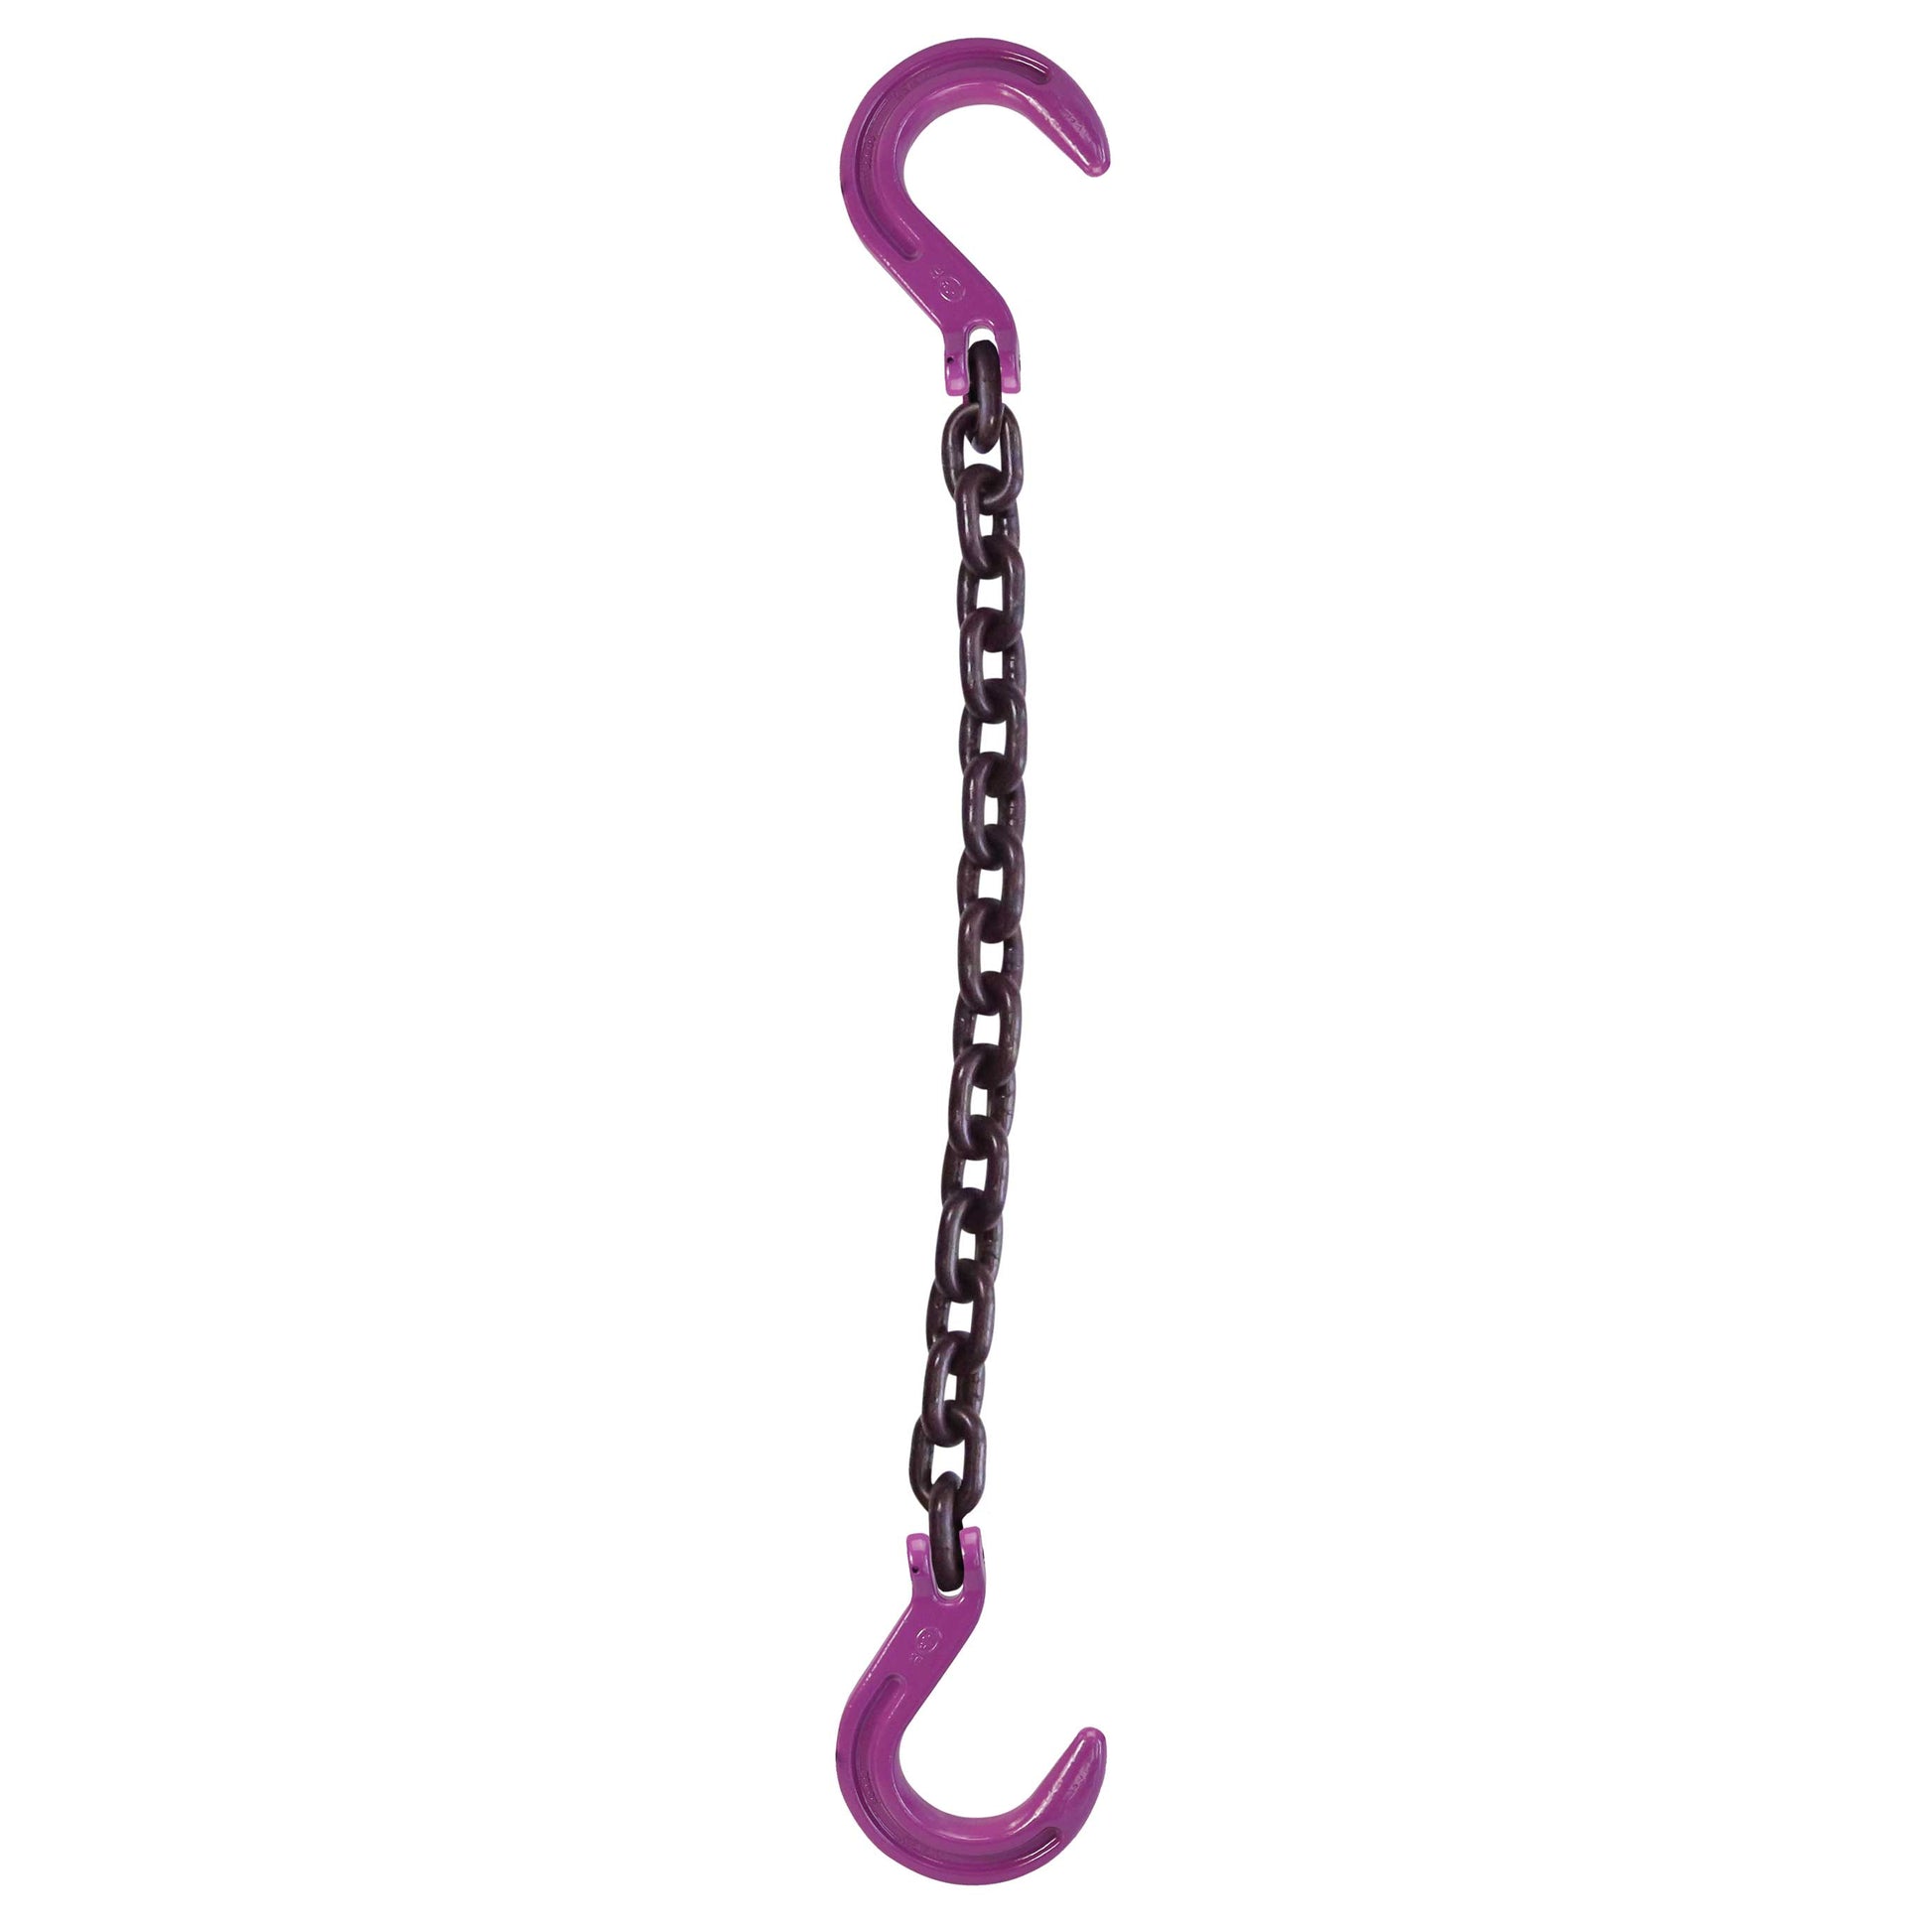 516 inch x 12 foot Single Leg Chain Sling w Foundry & Foundry Hooks Grade 100 image 1 of 2